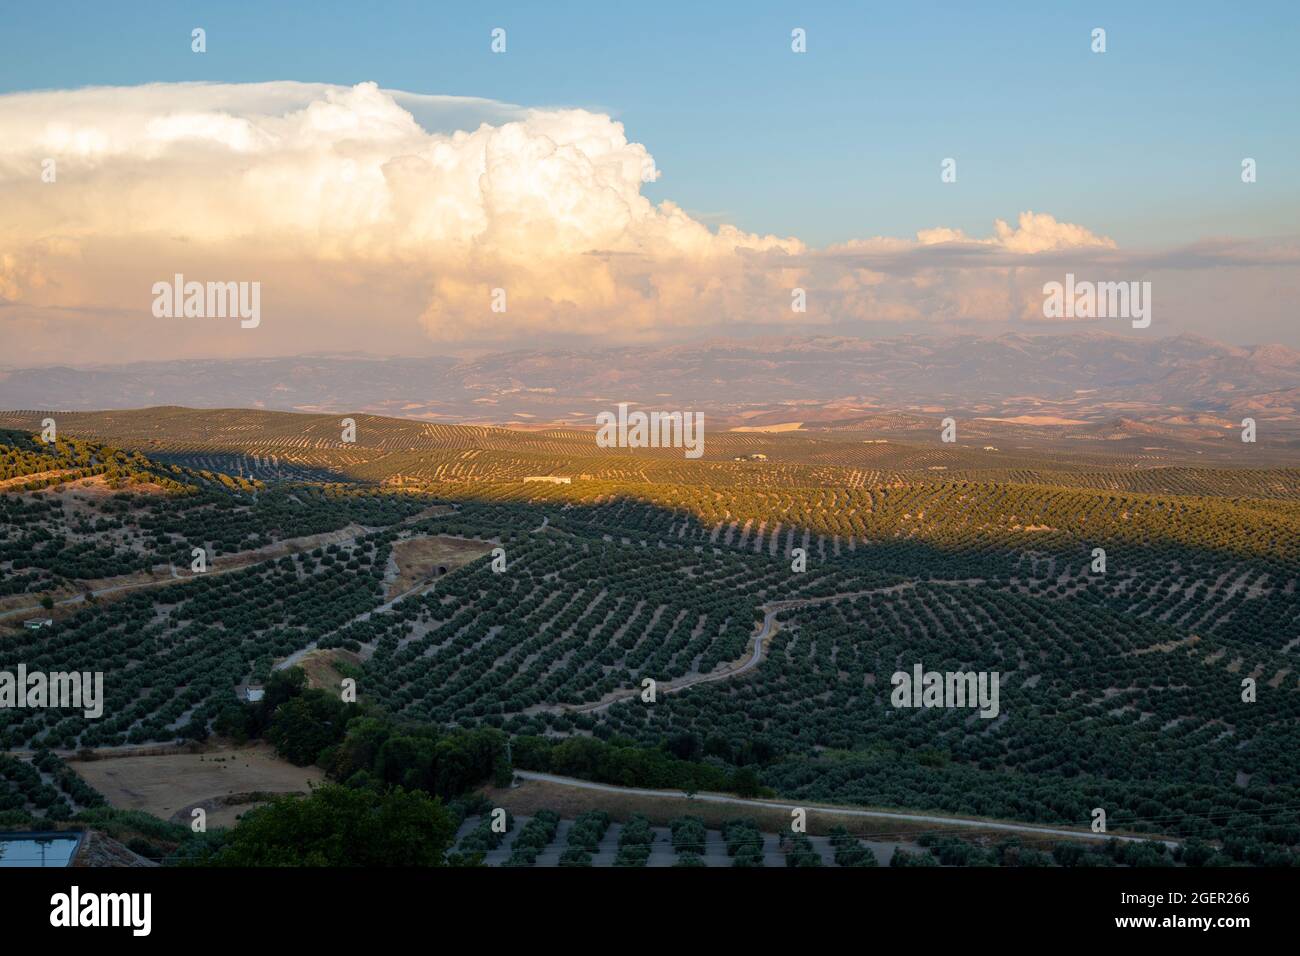 Olive trees in a field, Ubeda, Jaen Province, Andalusia, Spain Stock Photo